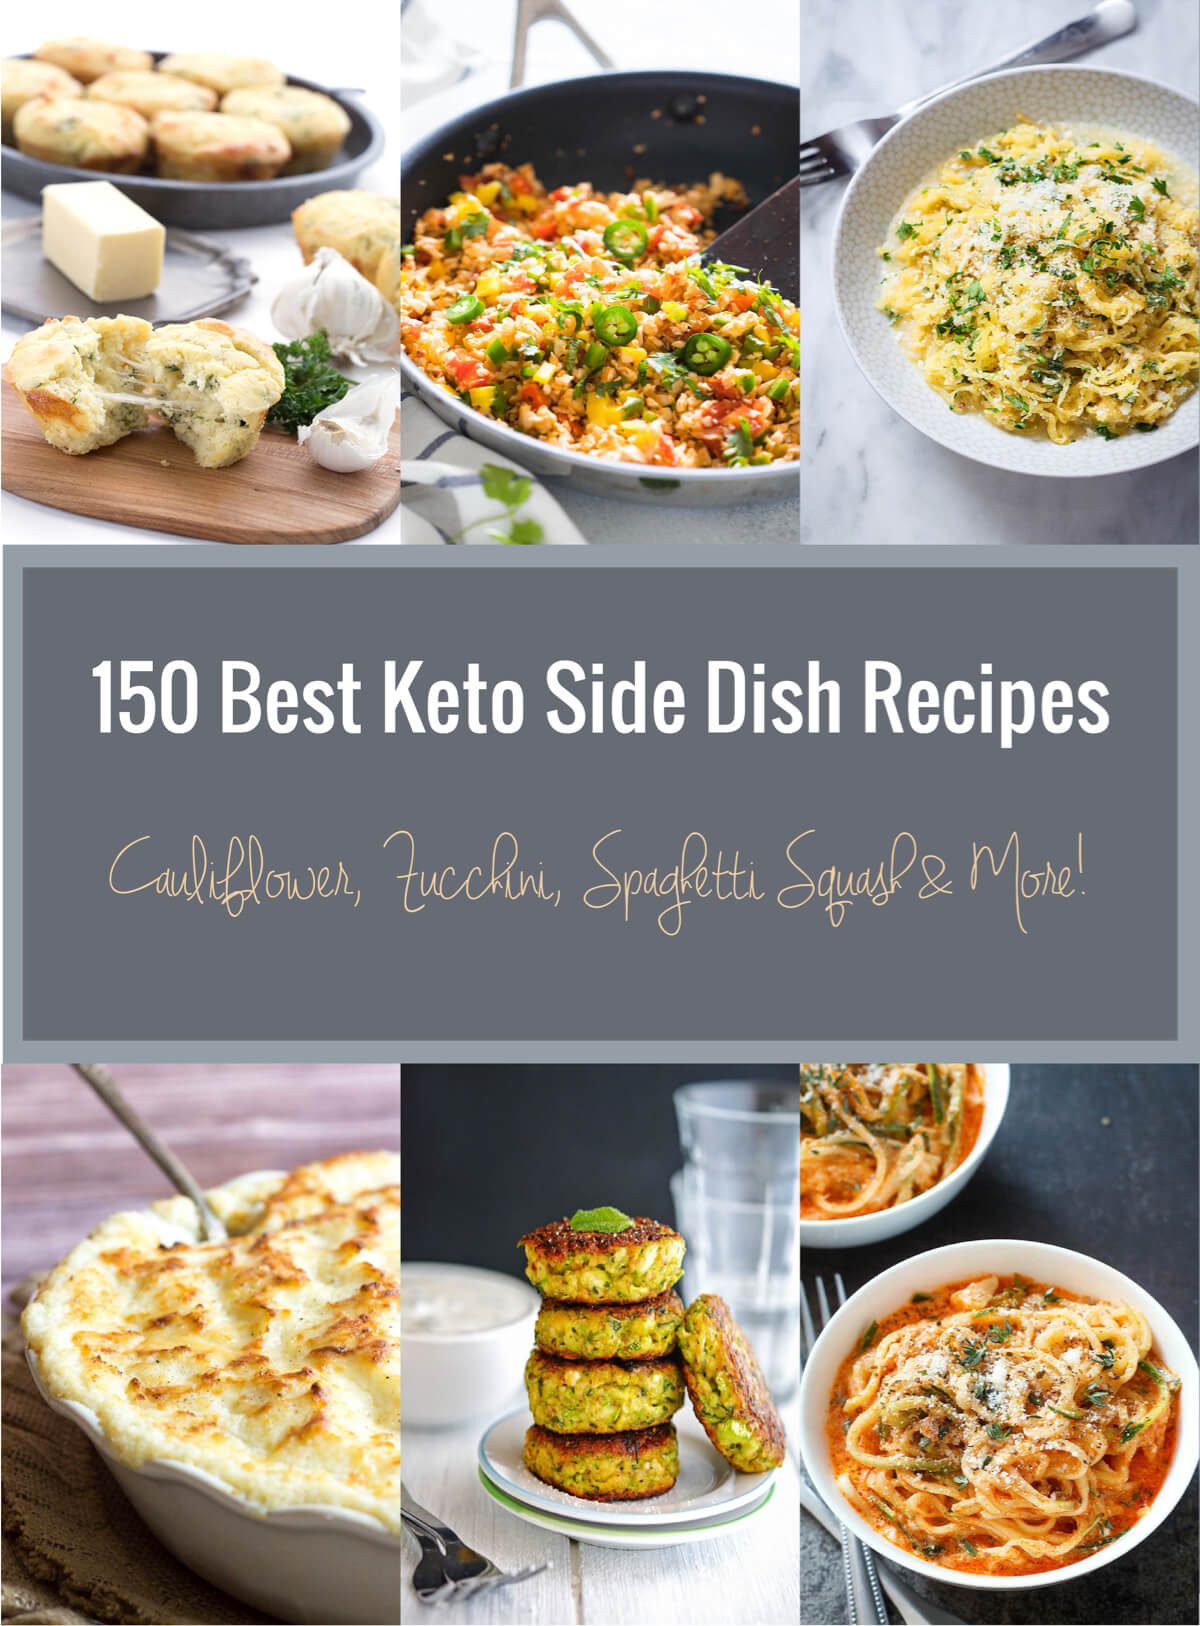 Keto Side Dishes
 150 Best Keto Side Dish Recipes Low Carb